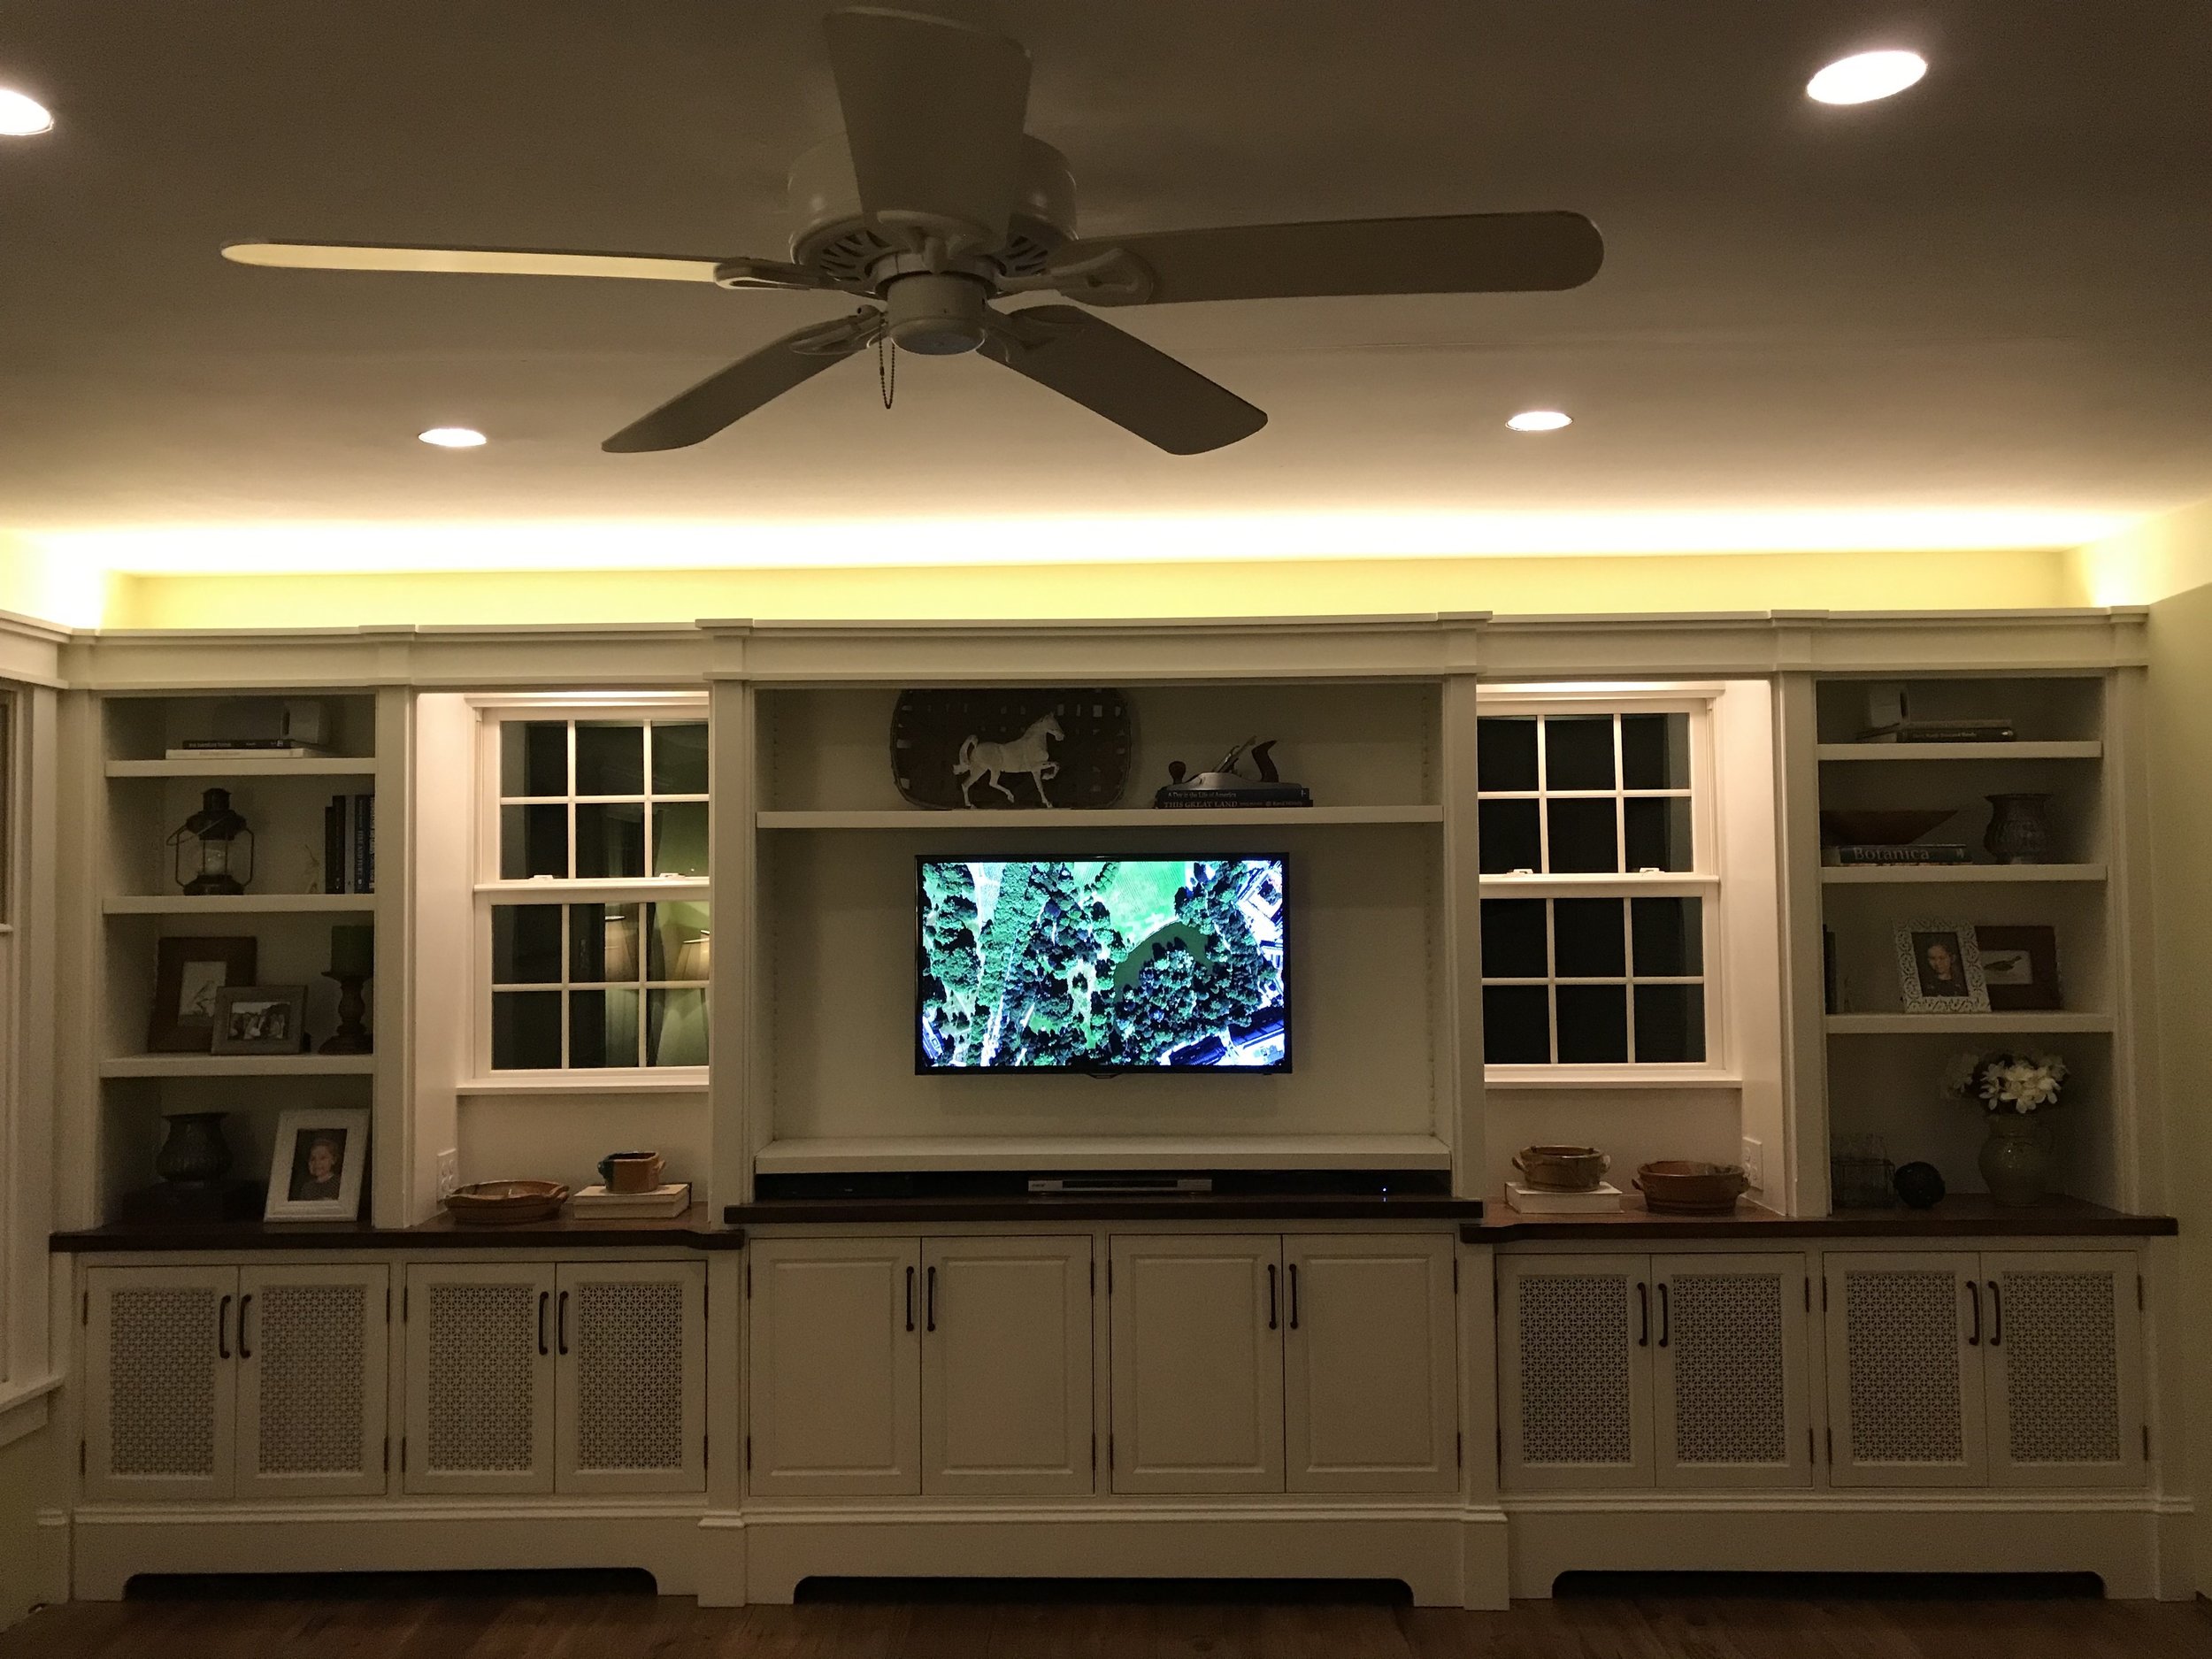  Instead of doing more traditional crown molding, we decided not to build the upper units to the ceiling so that we could carry the existing window trim across the top as a design detail. This allowed us to add another hidden feature: a long strip of